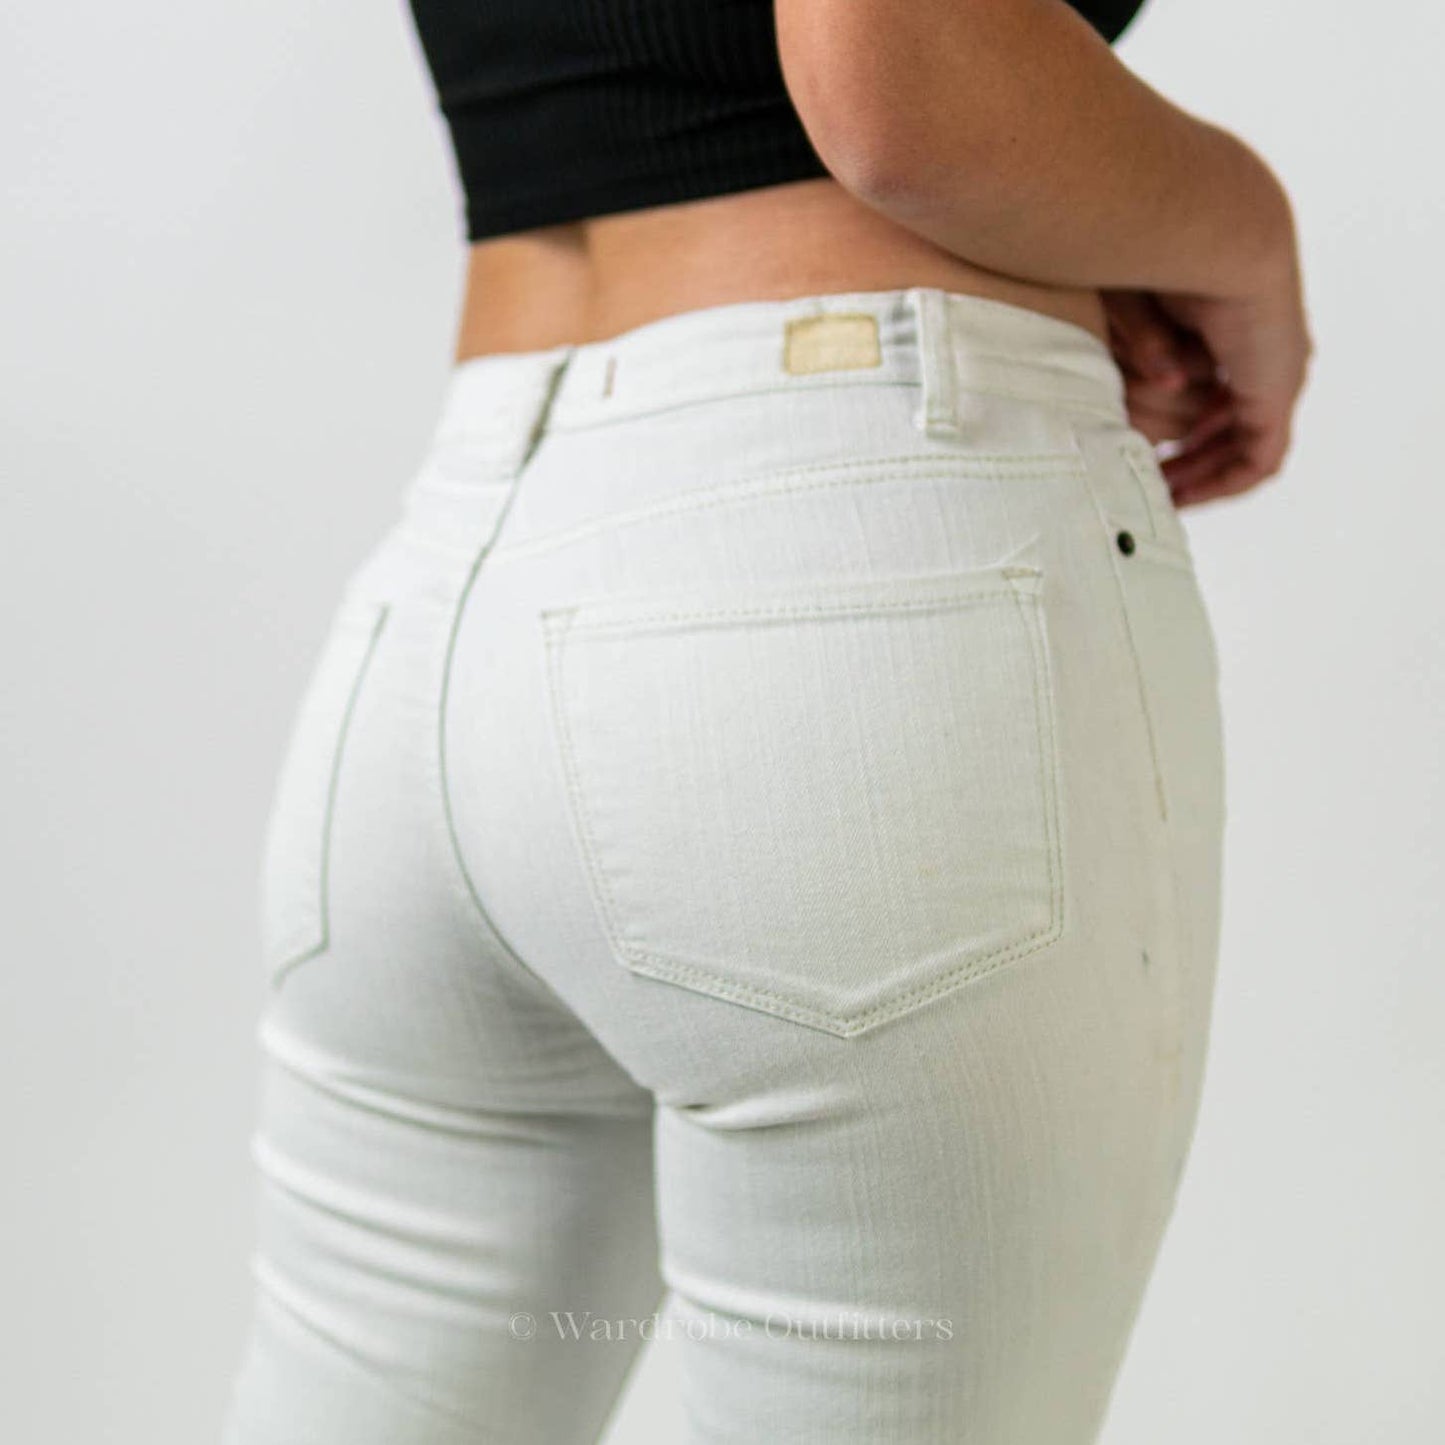 Urban Outfitters BDG High Rise Grazer Cigarette White Skinny Jeans - 28